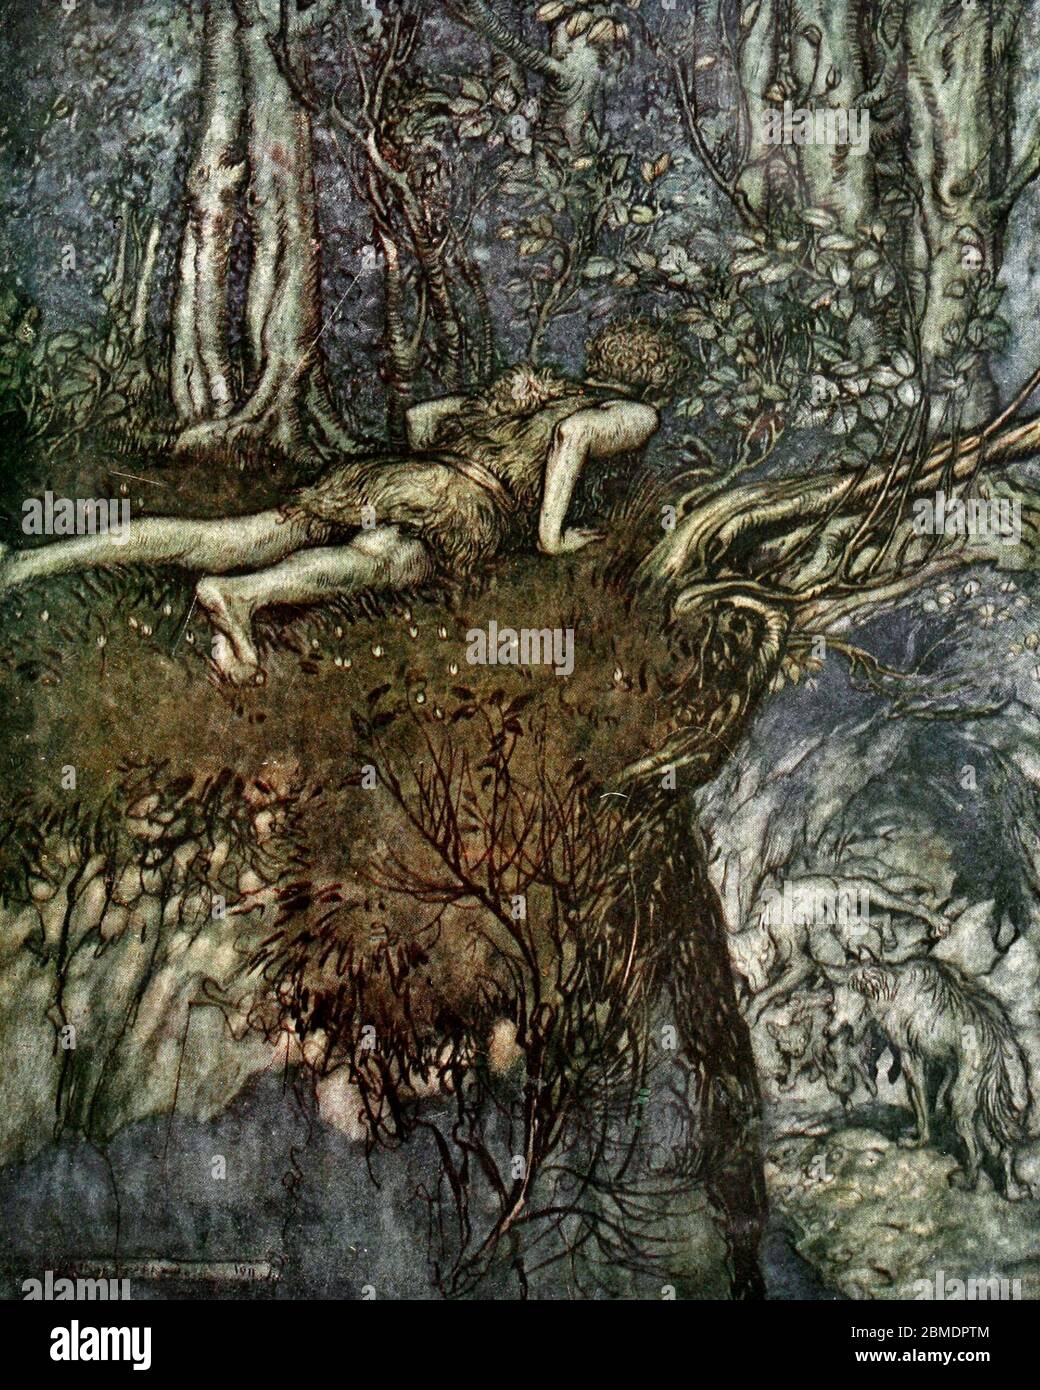 And there I learned what love was like - Siegfried from Siegfried, The Ring of the Nibelungen - Arthur Rackham, circa 1911 Stock Photo